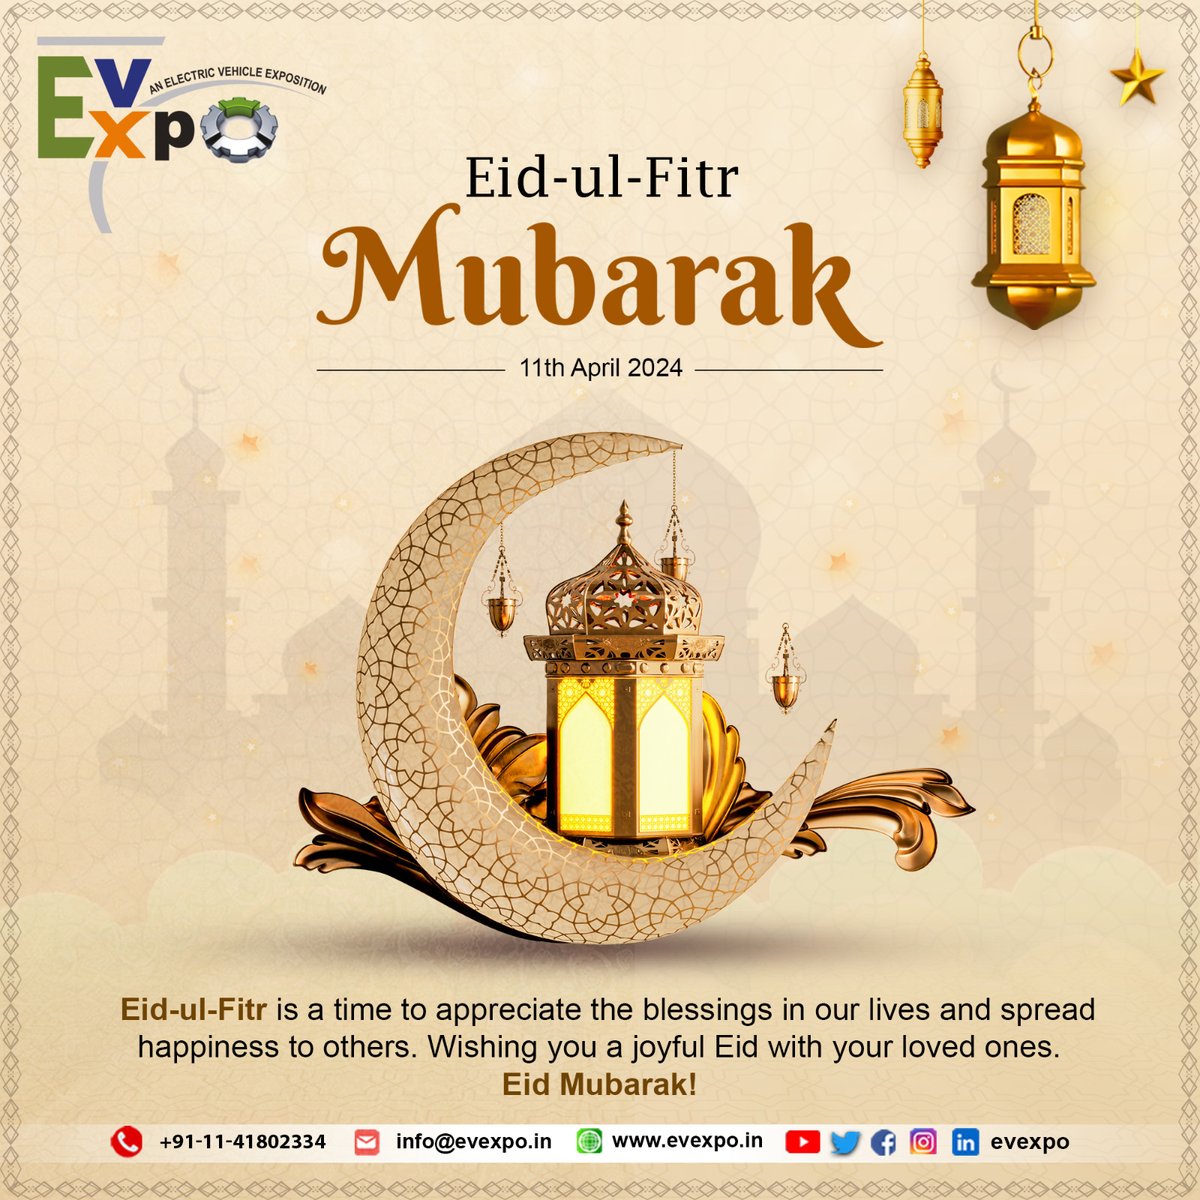 'Eid ul Fitr Mubarak!  Wishing everyone joy, peace, and prosperity on this blessed occasion. As the Electric Vehicle Expo (EvExpo) celebrates innovation and sustainability, let's also embrace the spirit of unity and compassion. 

#EidMubarak  #EidUlFitr #EidAlFitr2024 #Eid2024